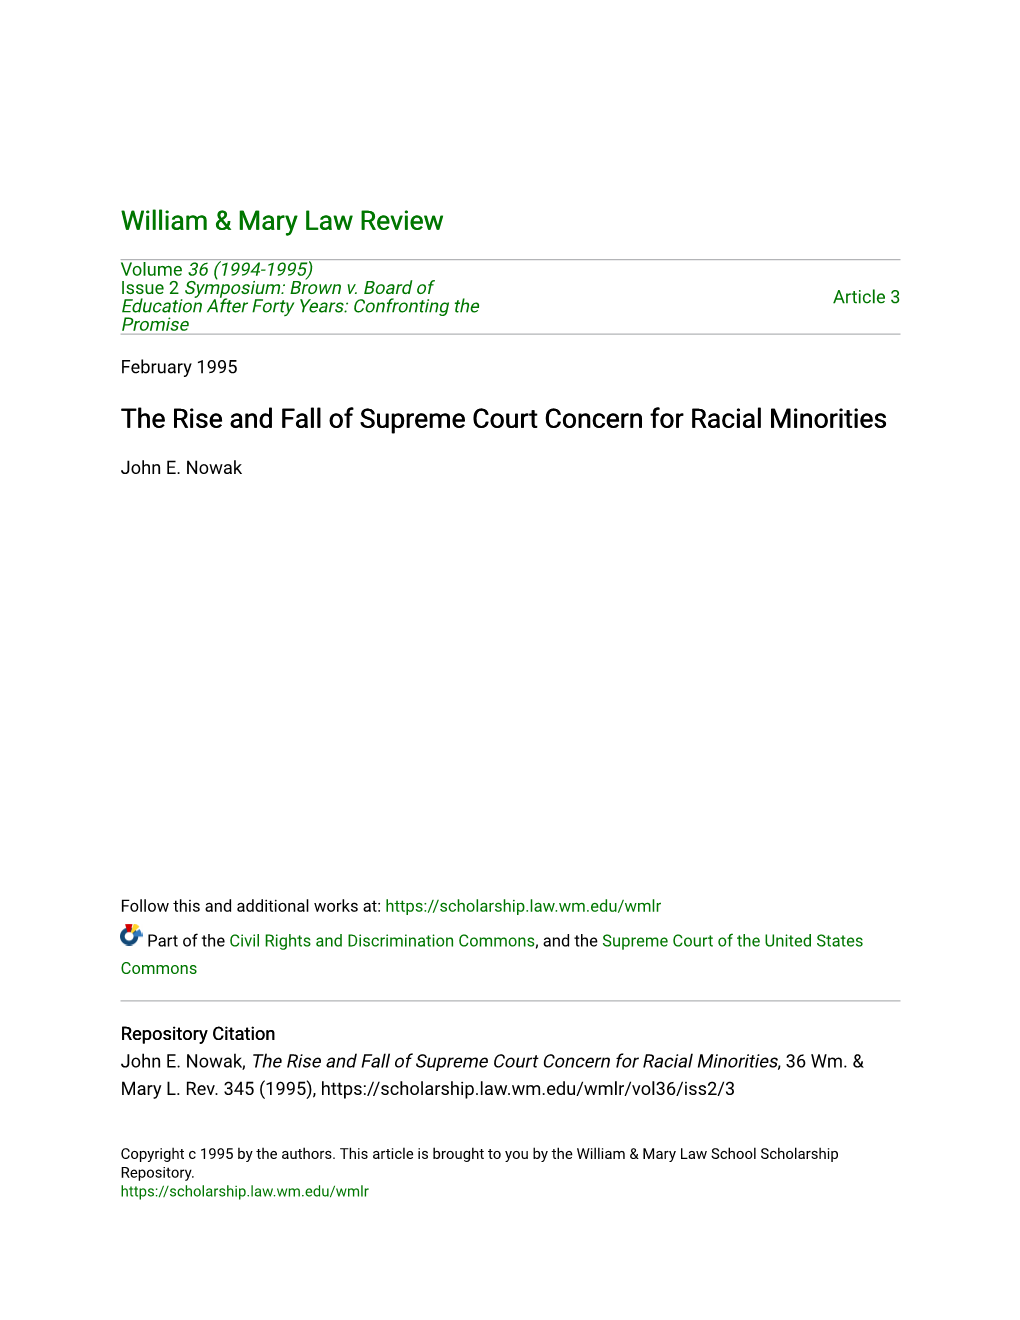 The Rise and Fall of Supreme Court Concern for Racial Minorities